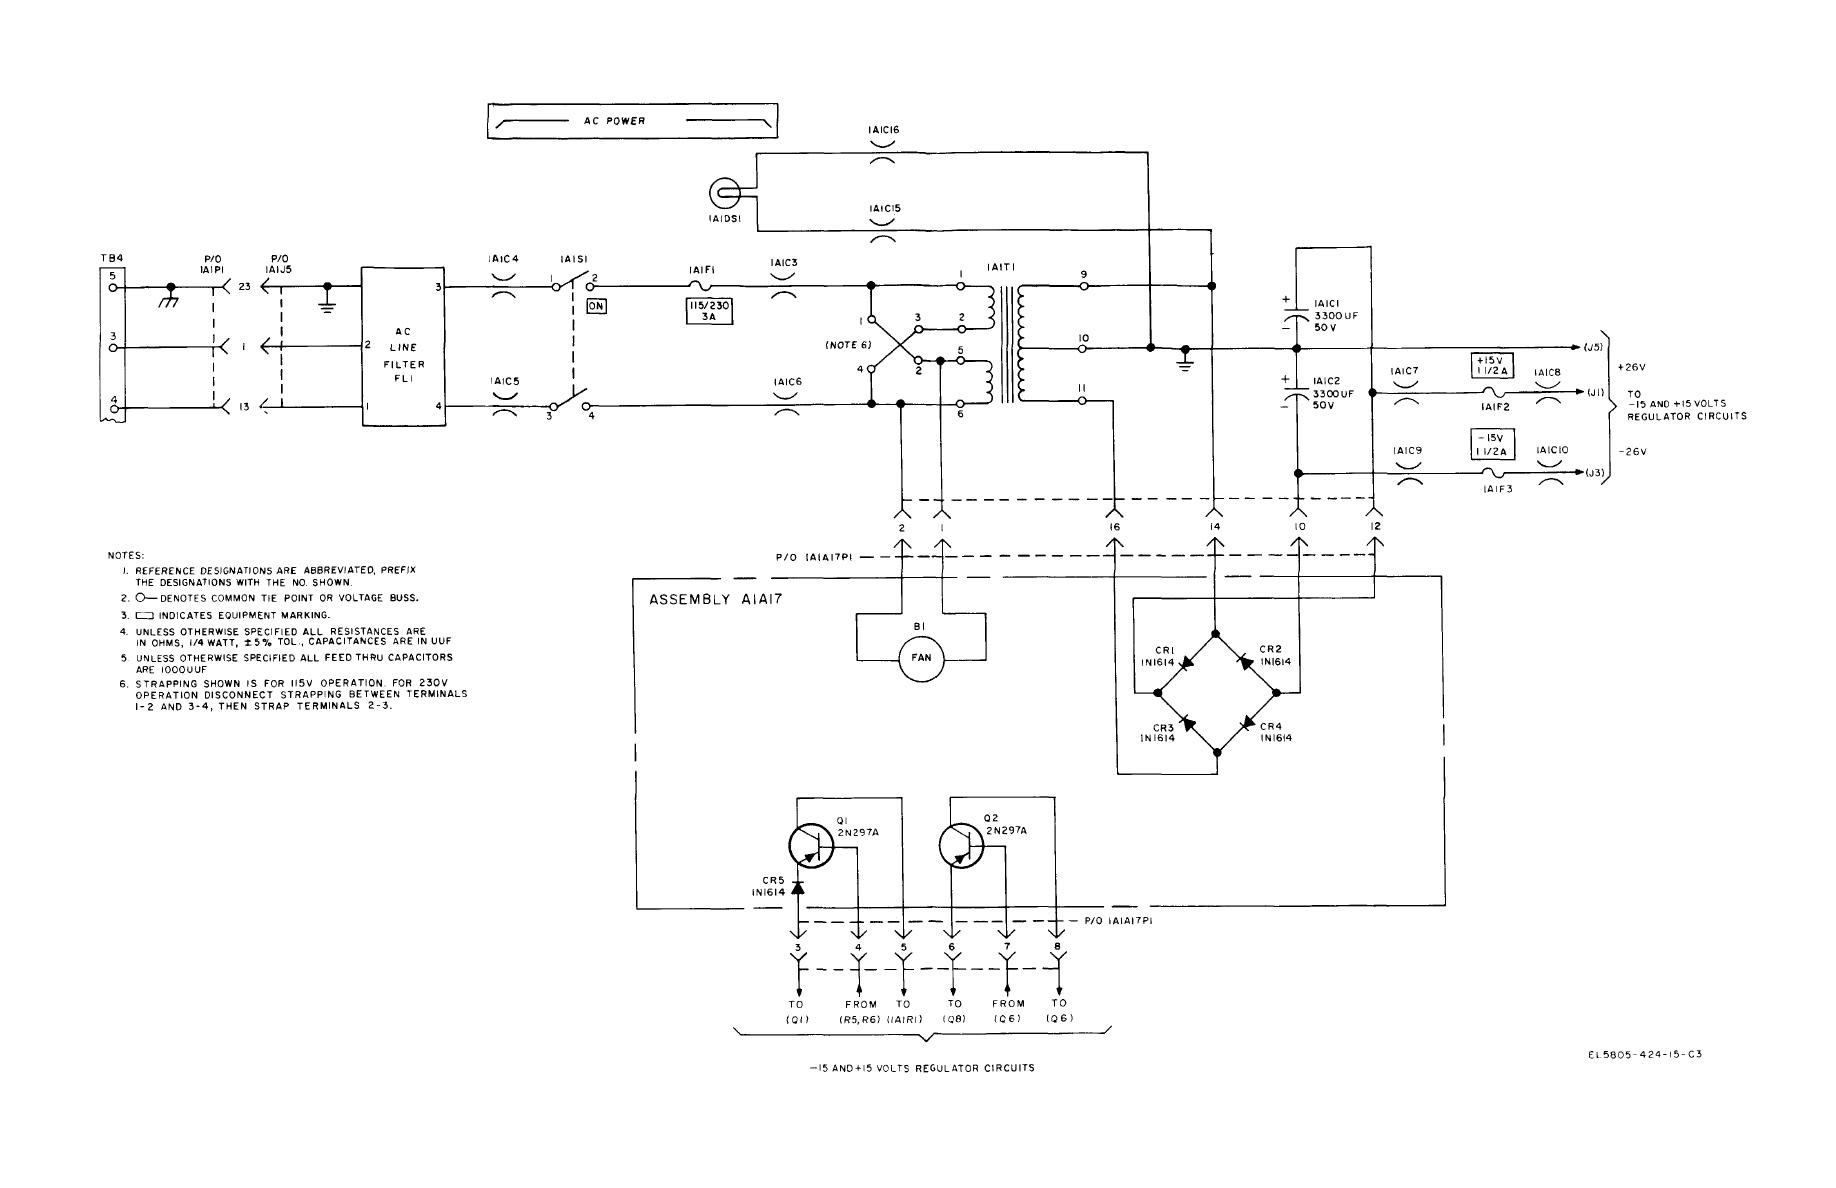 Ac power and rectifier circuit modem chassis and power supply submodule schematic diagram